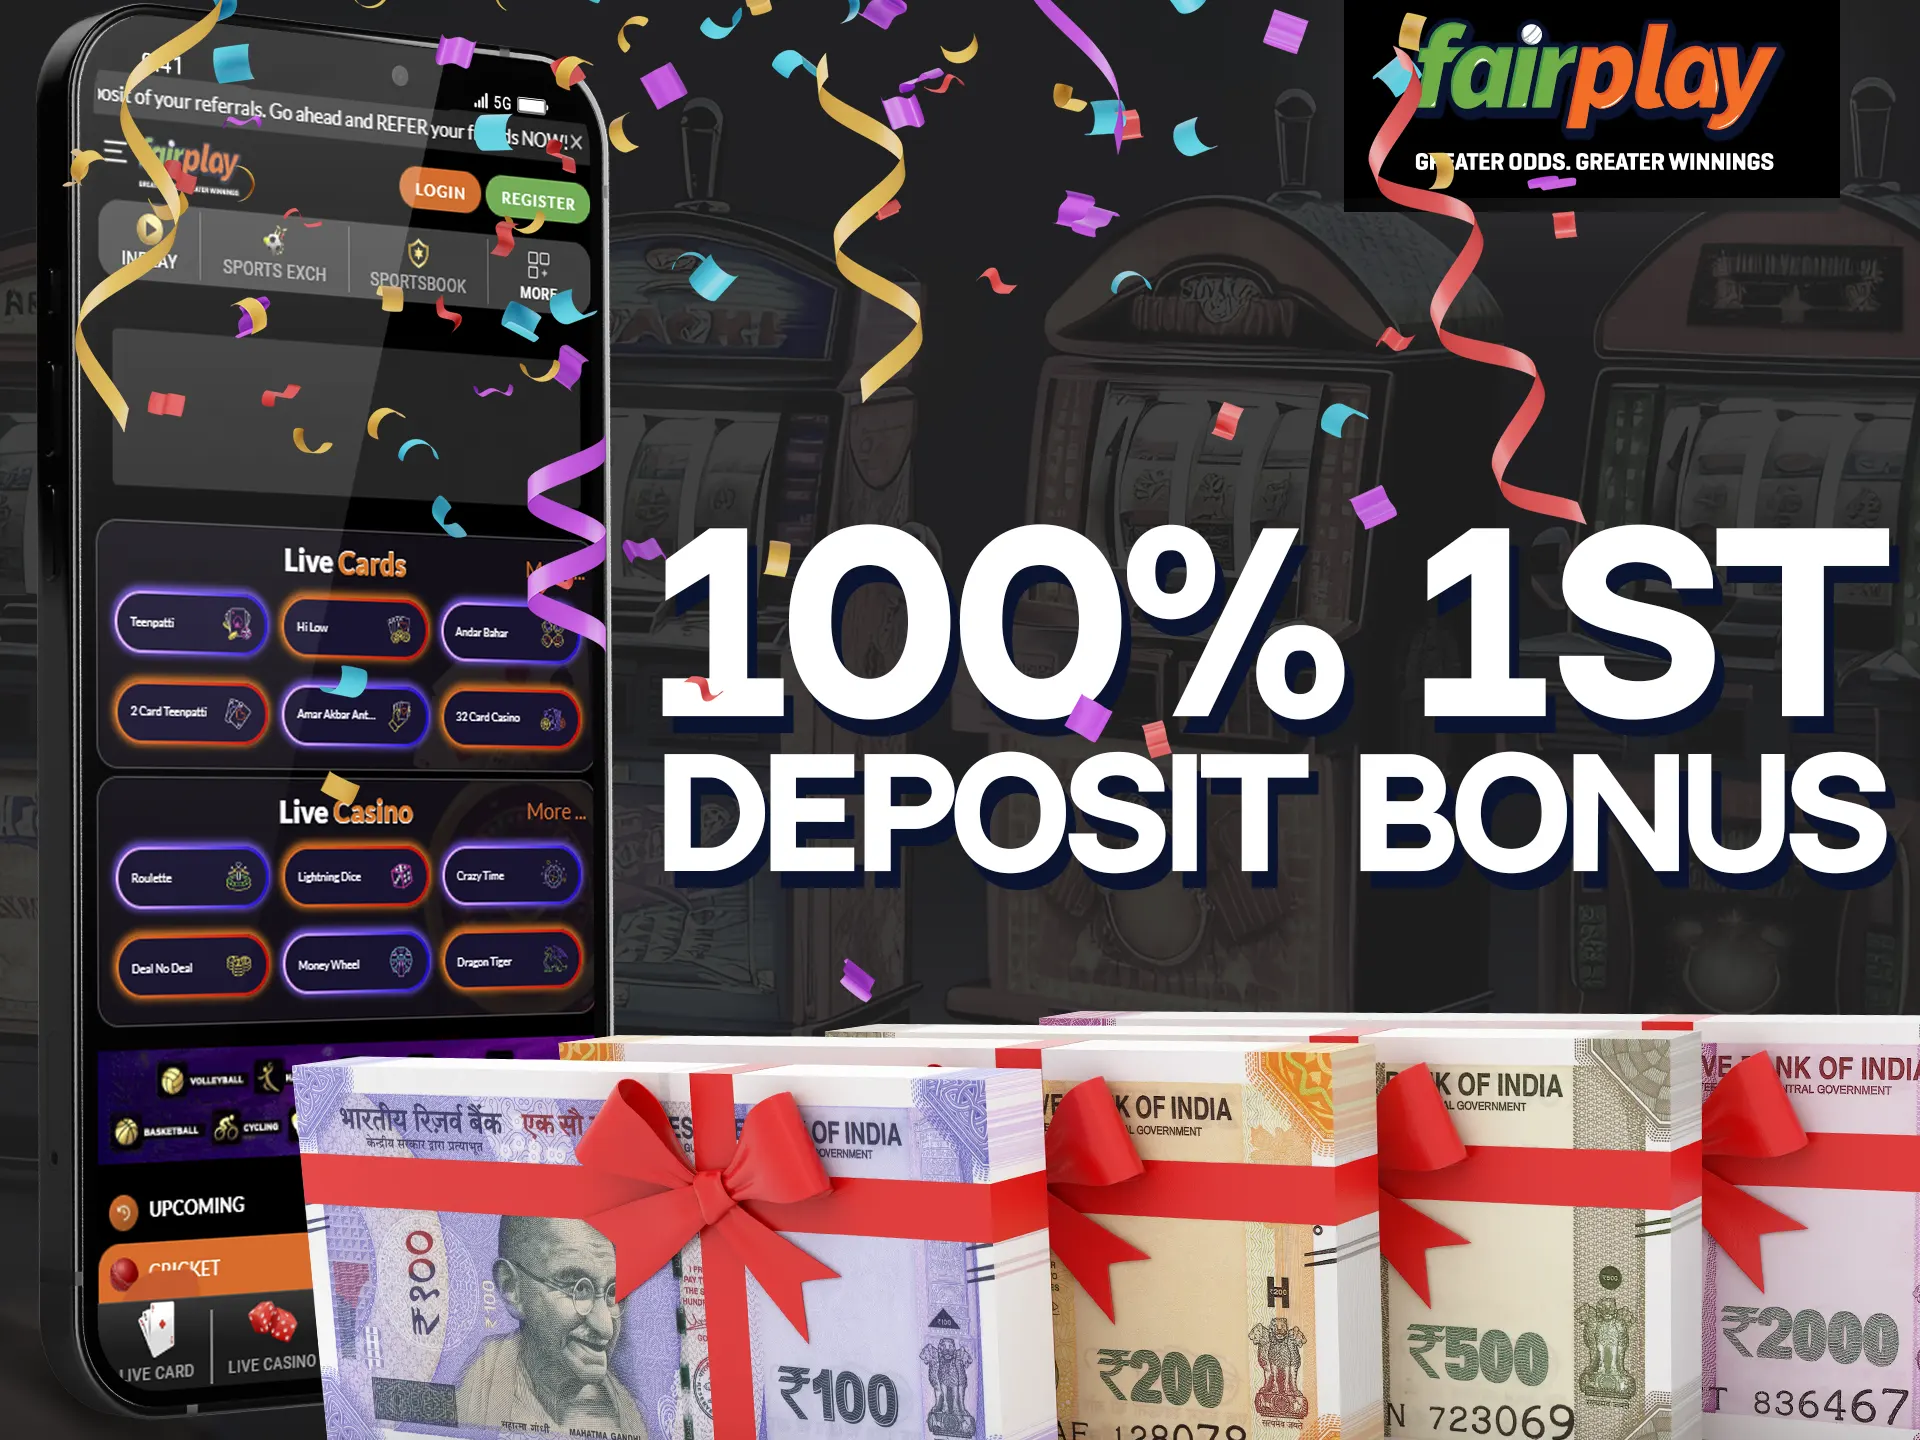 FairPlay provides a tiered first deposit bonus with varied percentages based on deposit amount.